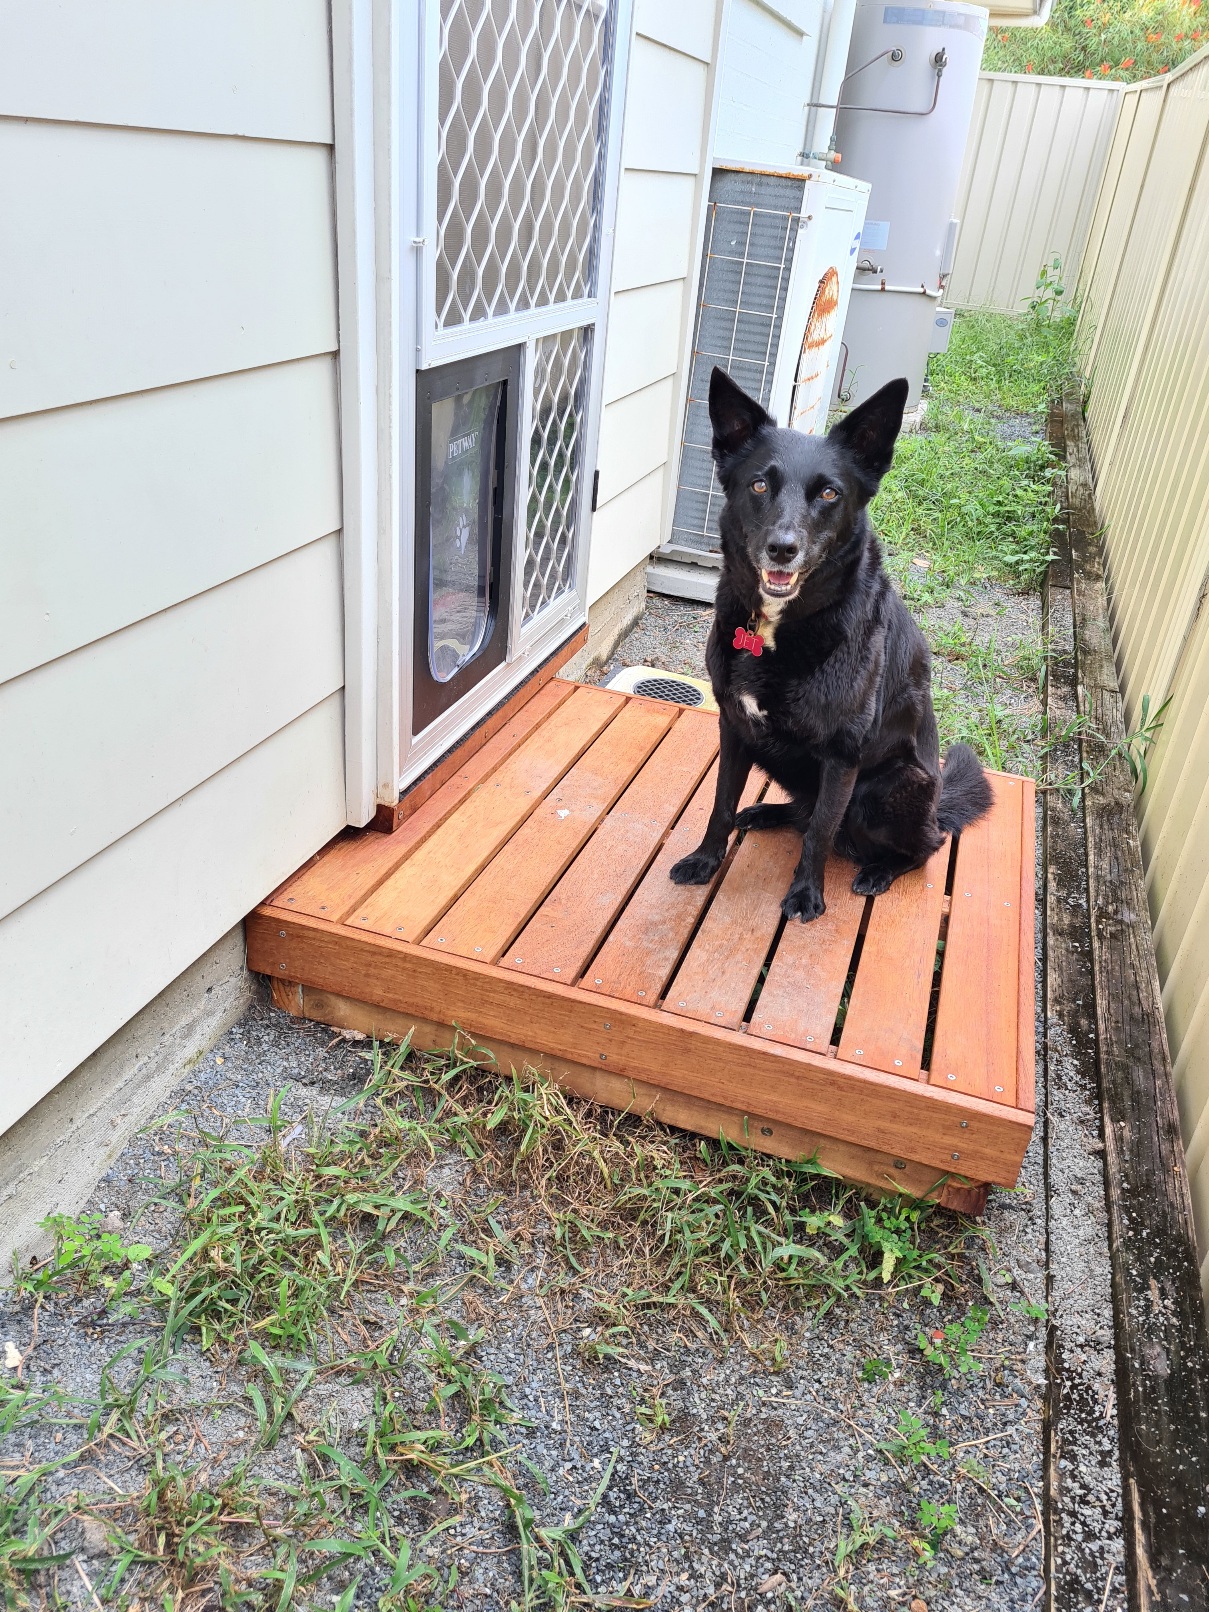 Jet sitting on the temporary porch outside the new doggy door